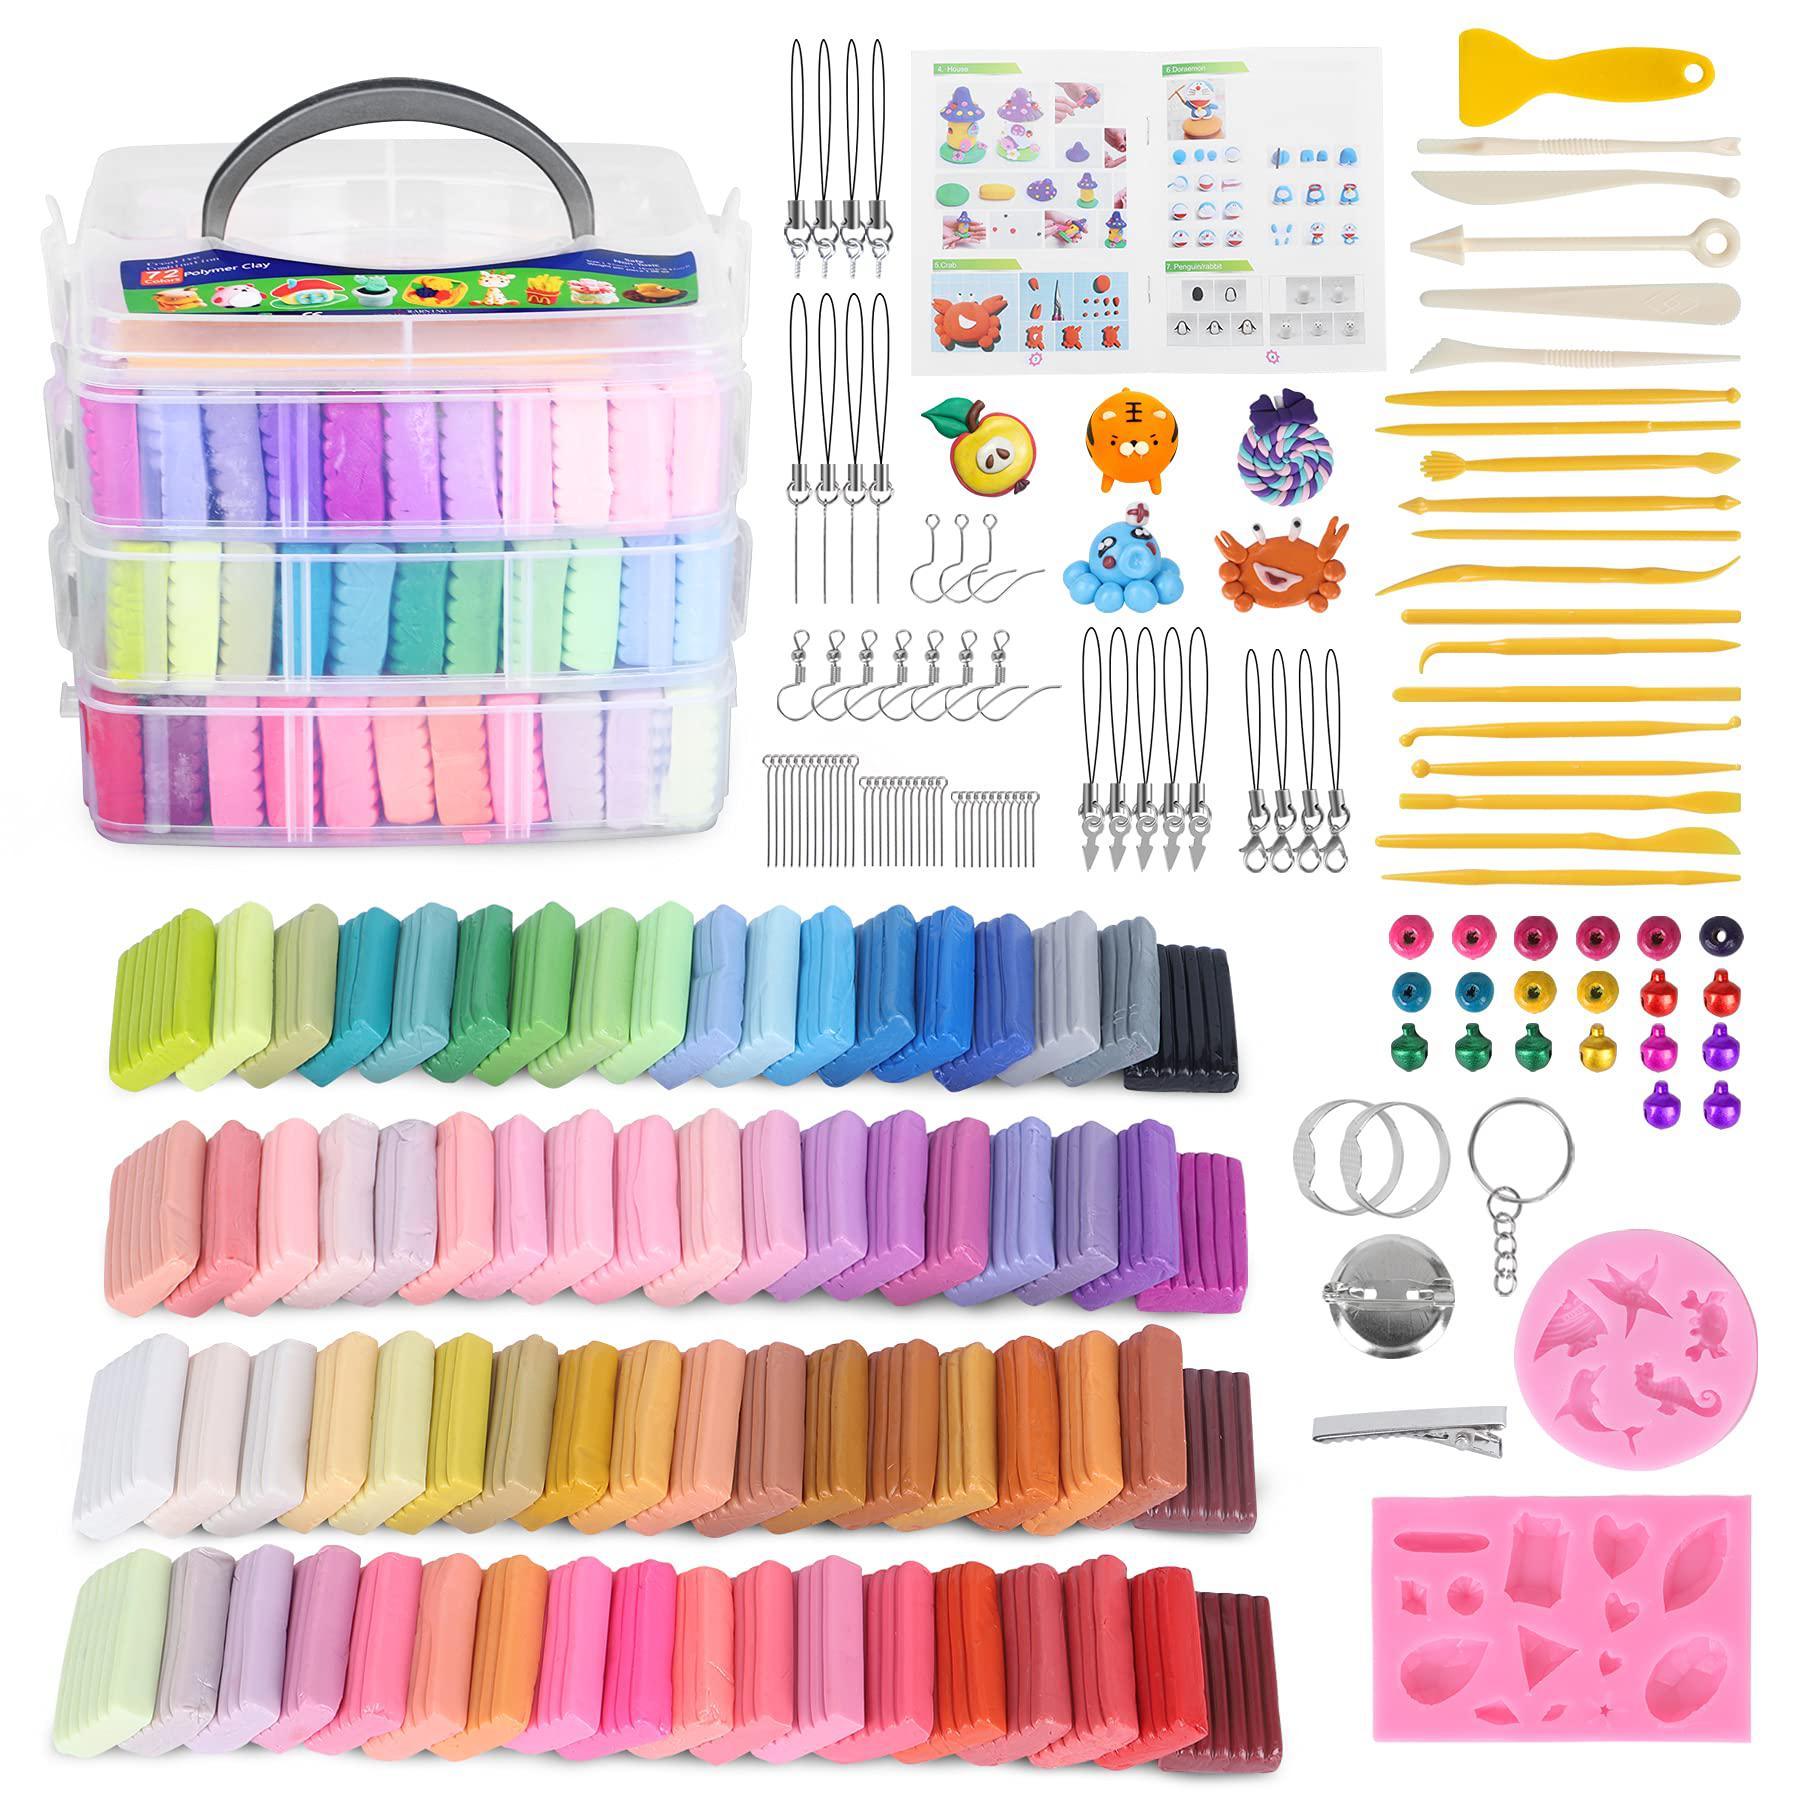 Aestd-ST Polymer Clay Kits 72colors Sculpting Molding Clay DIY Modeling Clay Oven Baking Clay Kits 19 Sculpting Tools and 12 Kinds of